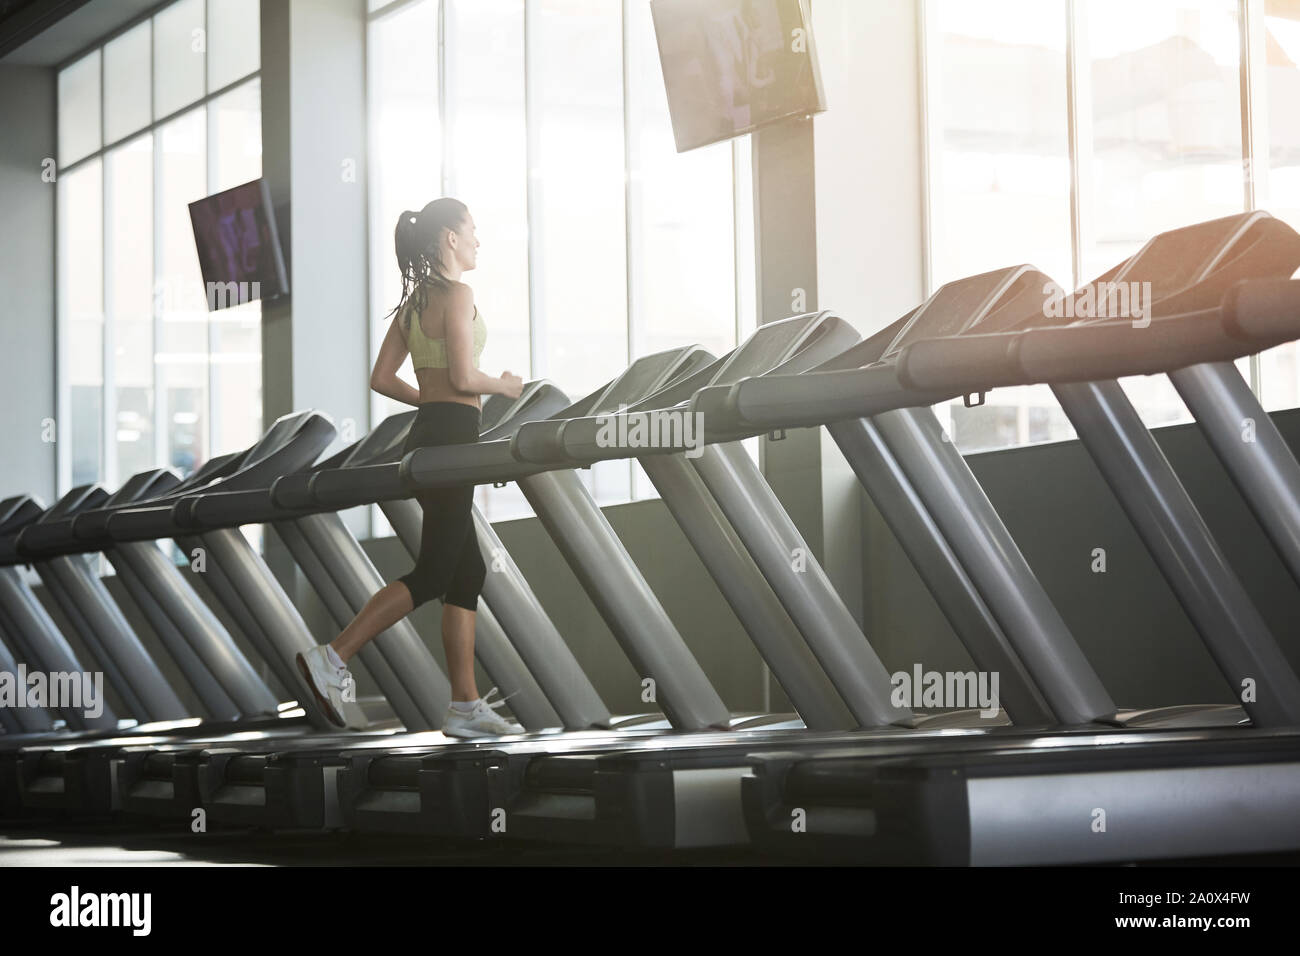 Wide angle back view portrait of young woman running on treadmill alone in empty gym, copy space Stock Photo